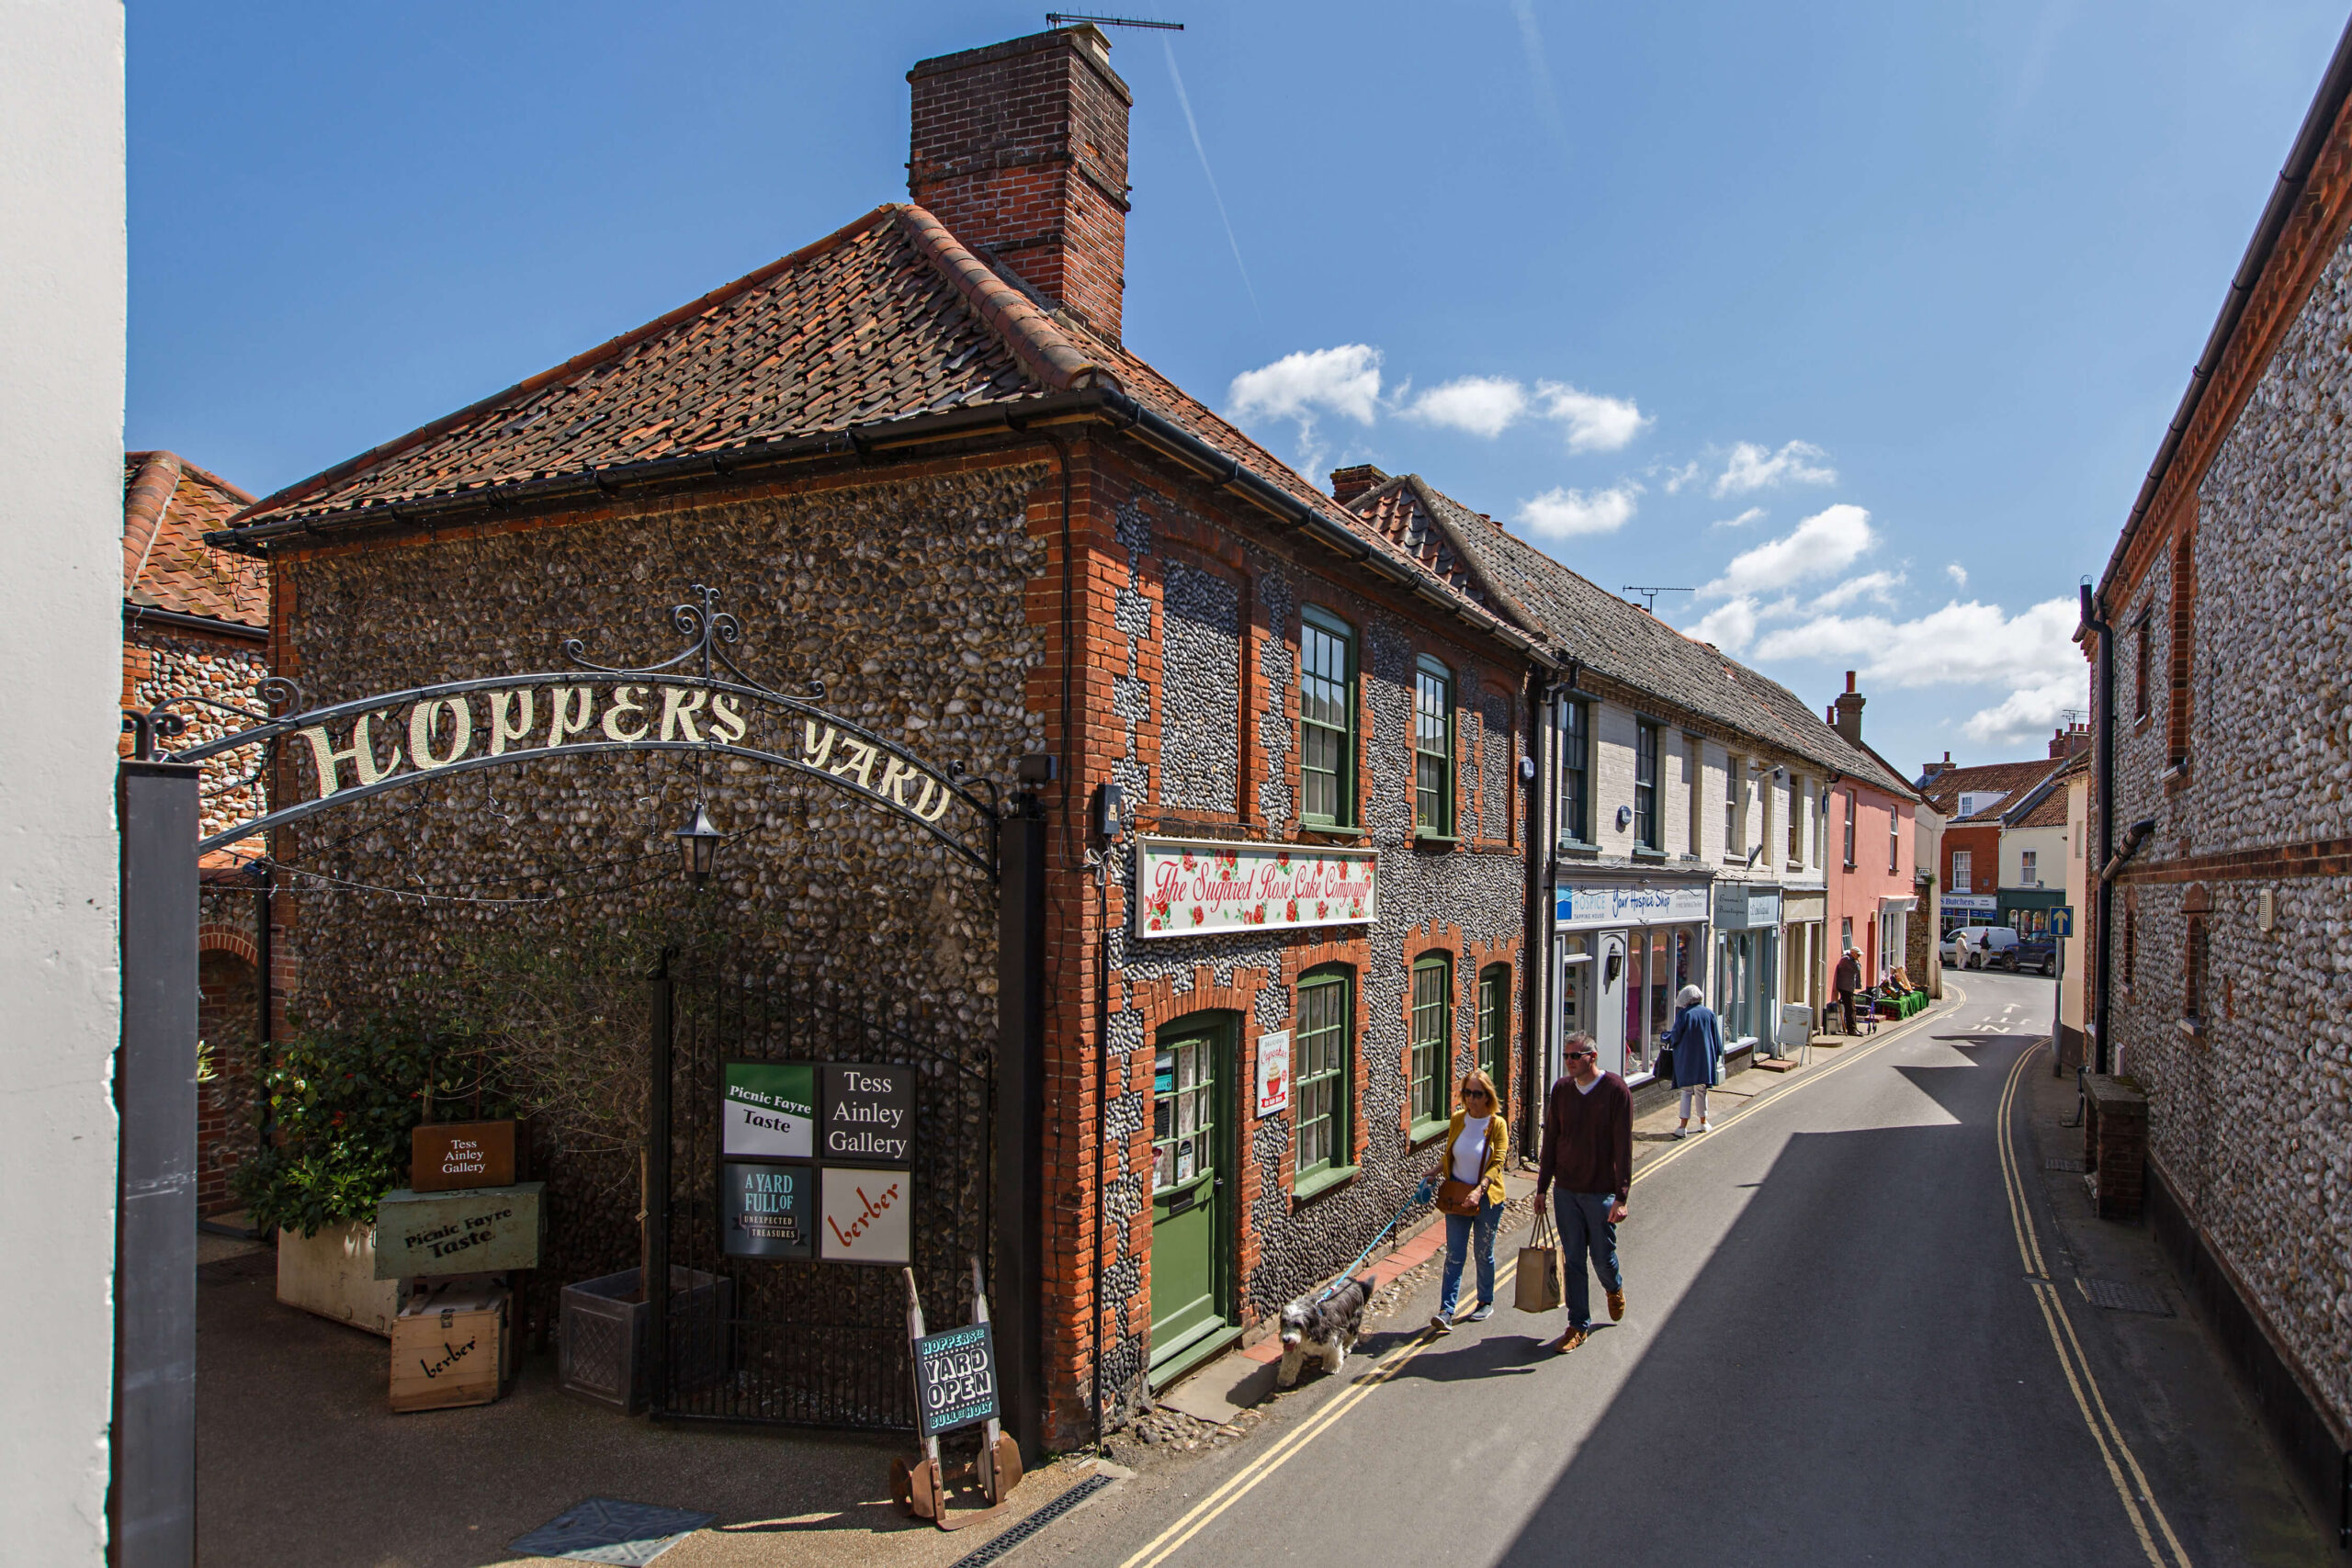 Hoppers Yard and Bull Street © Visit North Norfolk